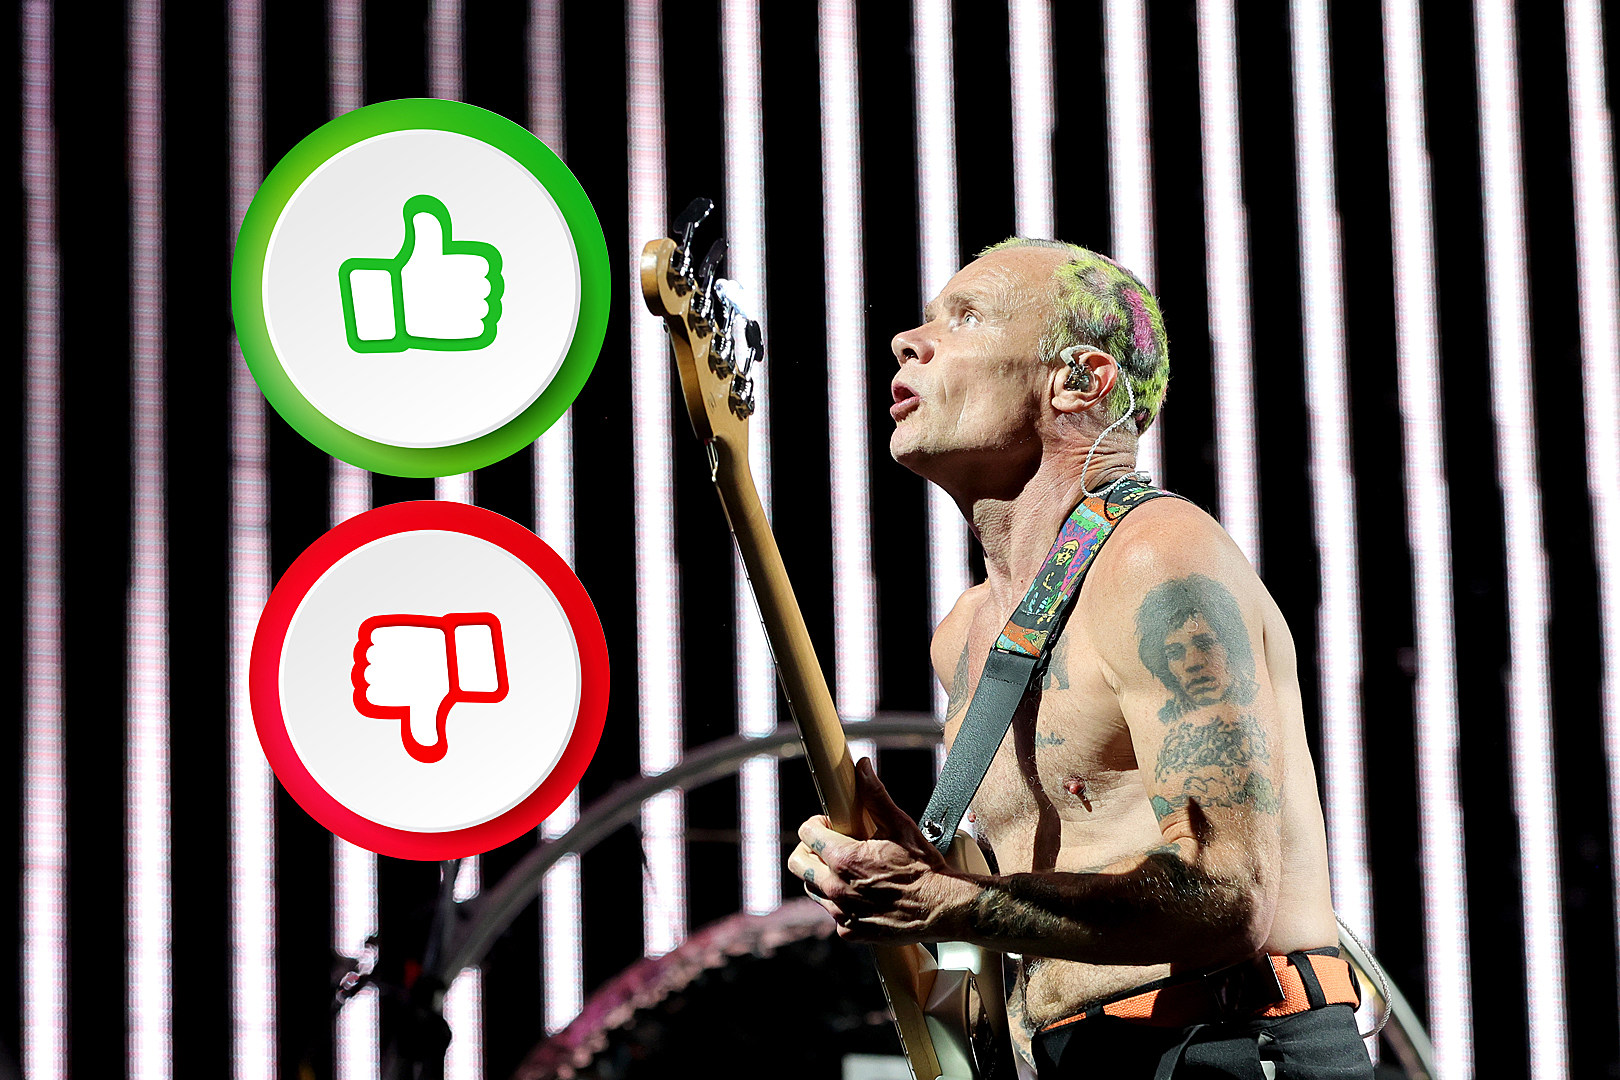 Whole Lotta Fans': Share your favorite Red Hot Chili Peppers songs for a  chance to be heard on air